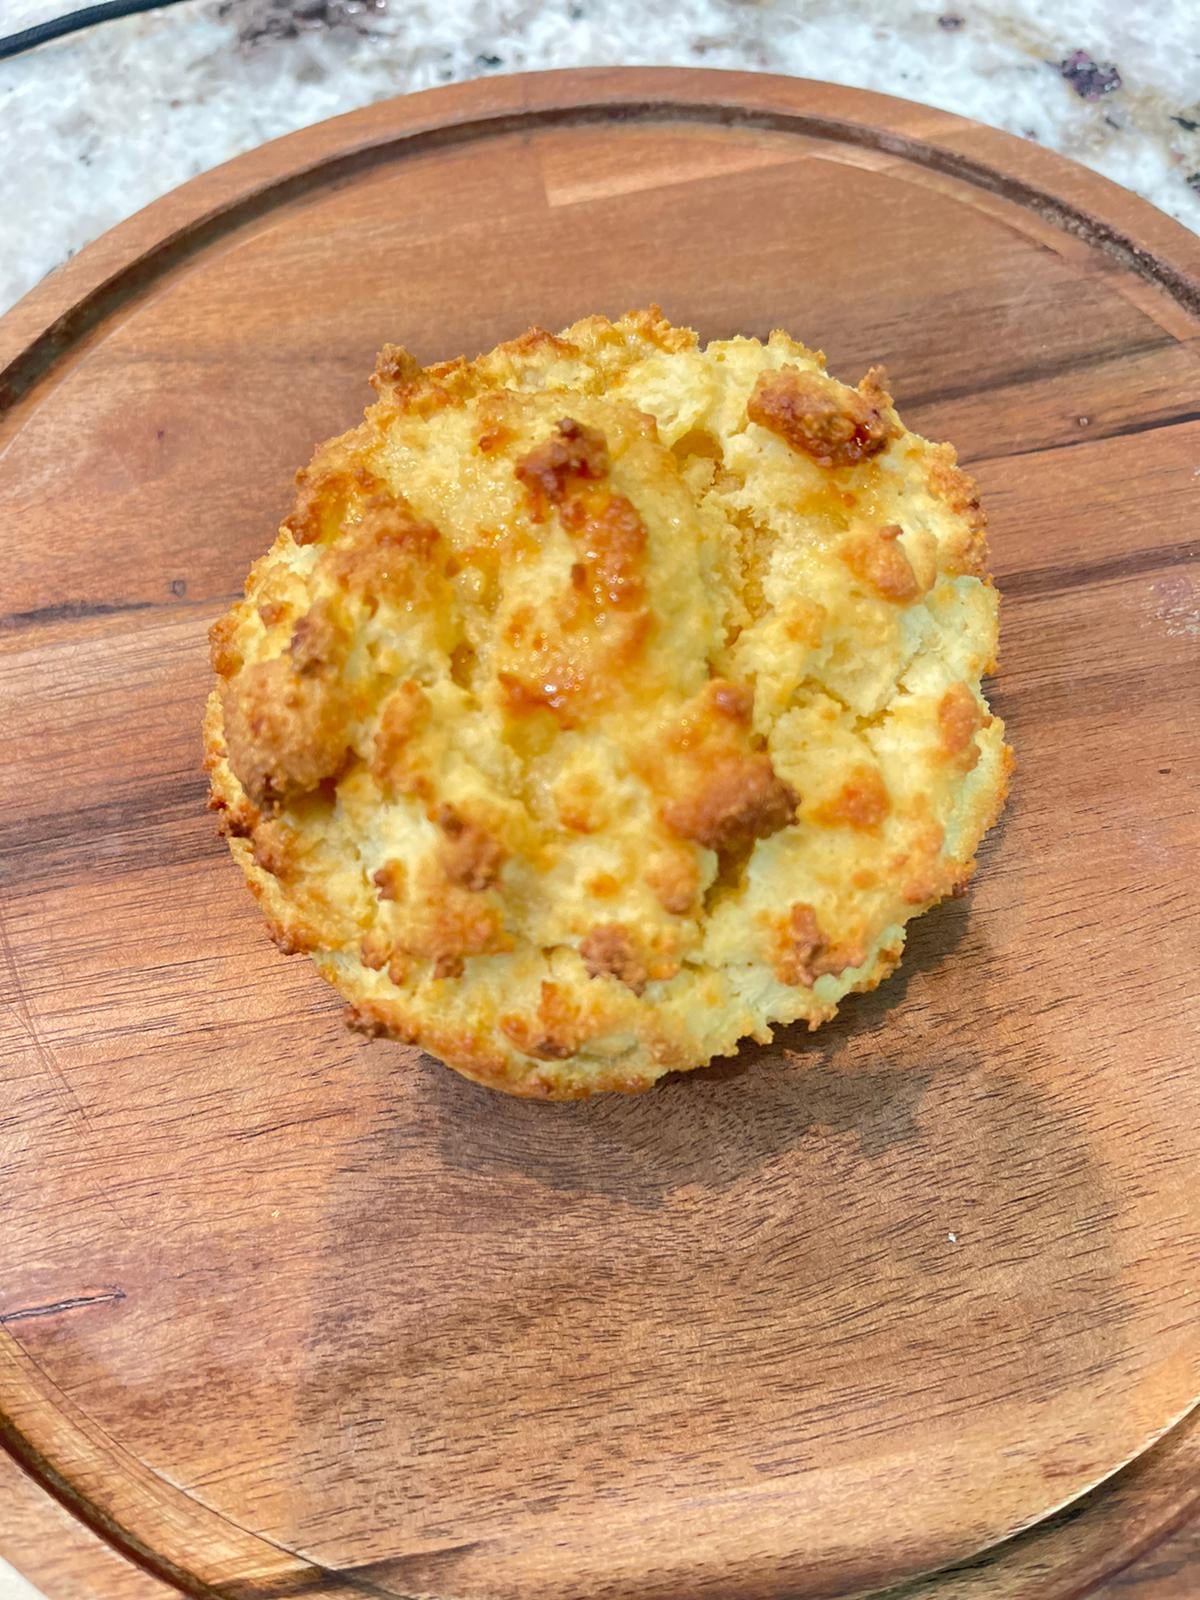 Keto Honey Butter Biscuits (4) Carbs Me Out!